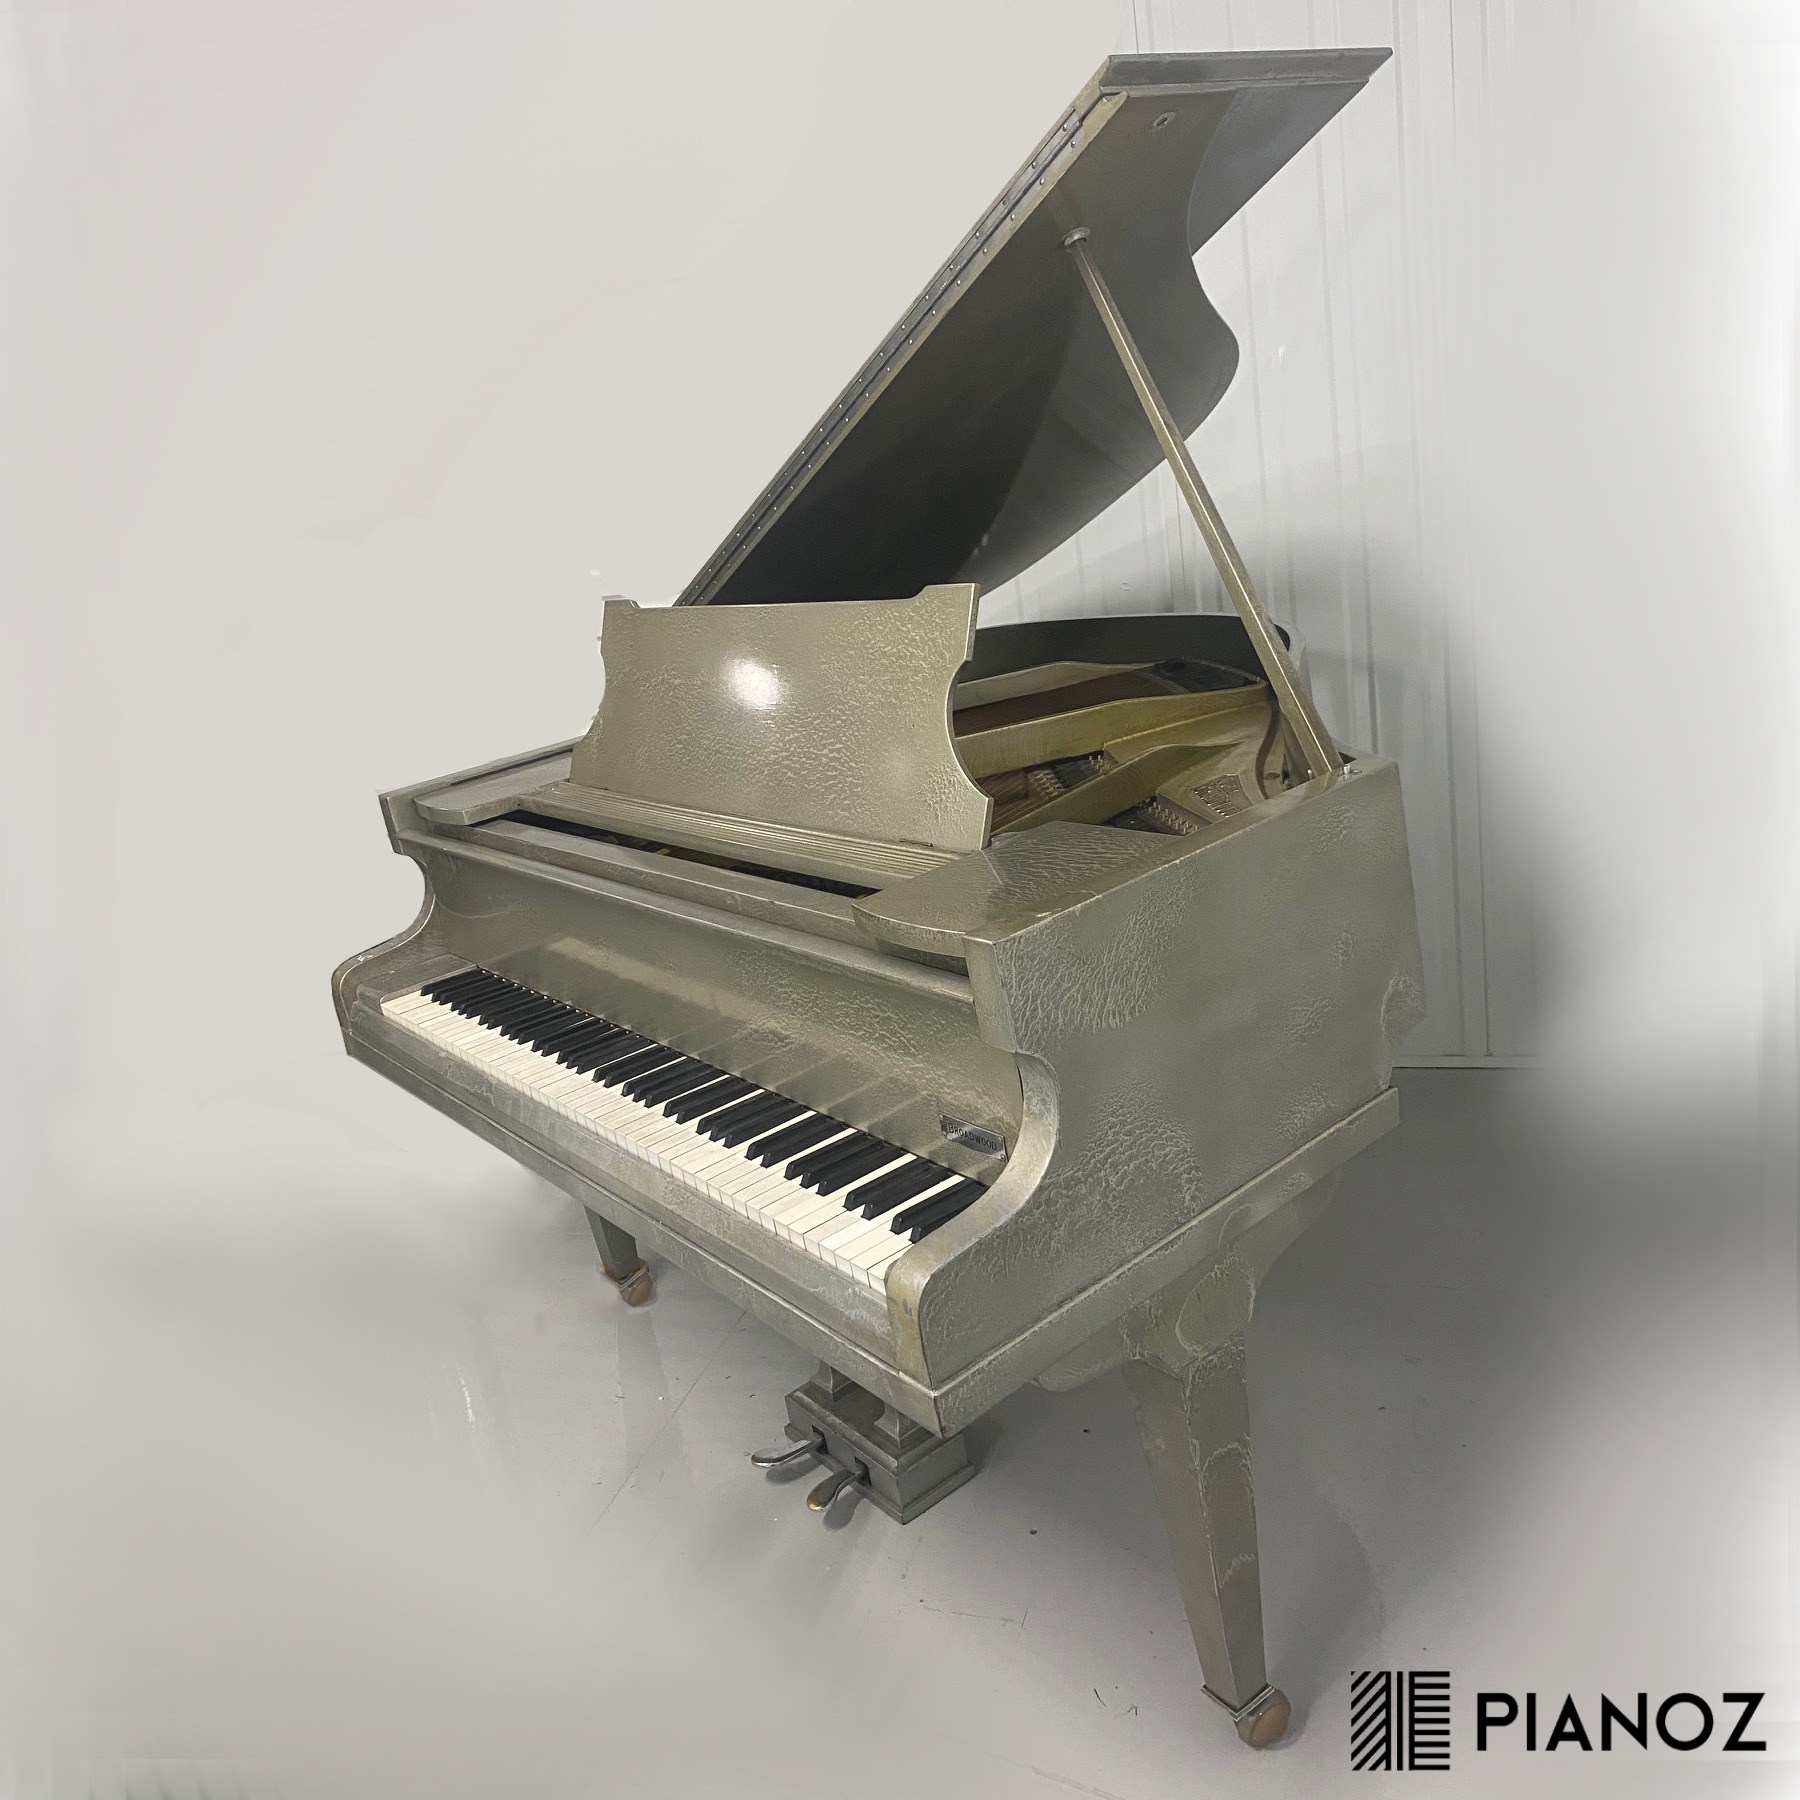 Broadwood Silver Crackle Baby Grand Piano piano for sale in UK